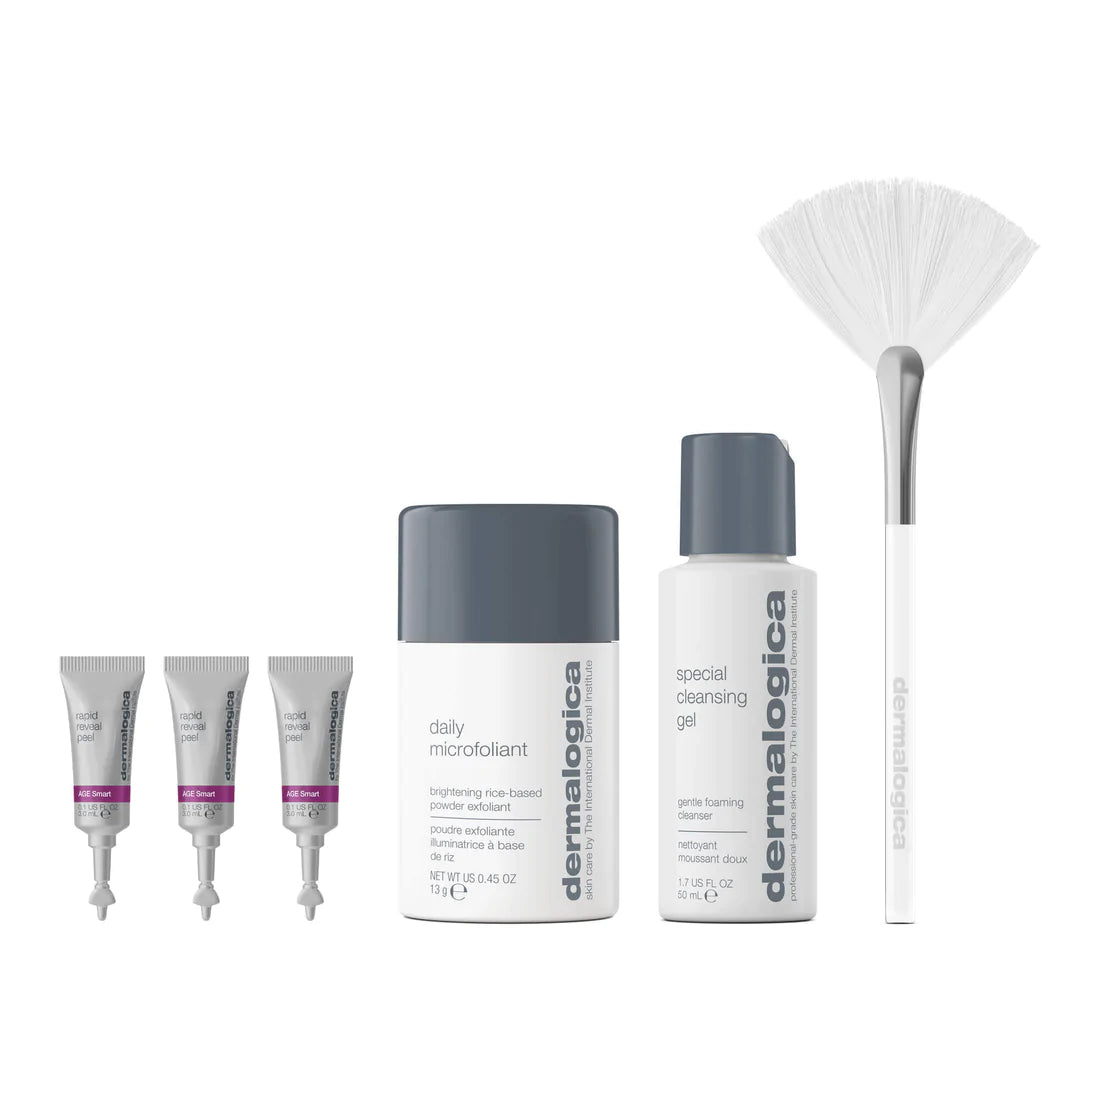 DERMALOGICA THE GIFT OF SKIN HEALTH - THE PEEL POWER-UP SET